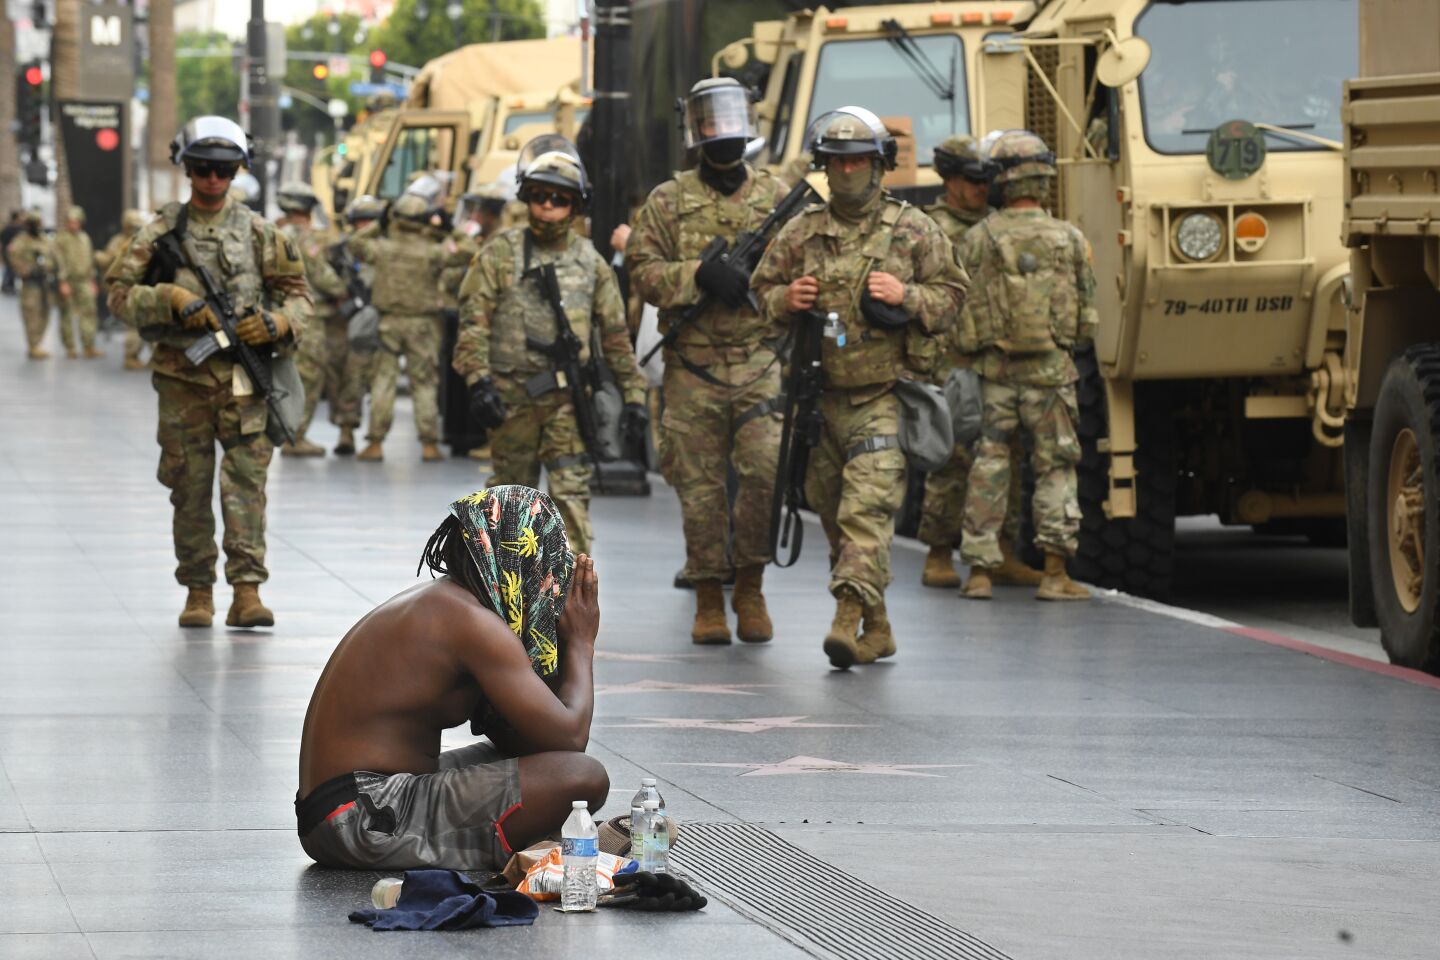 Bando Kev prays along Hollywood Blvd. in front of the National Guard